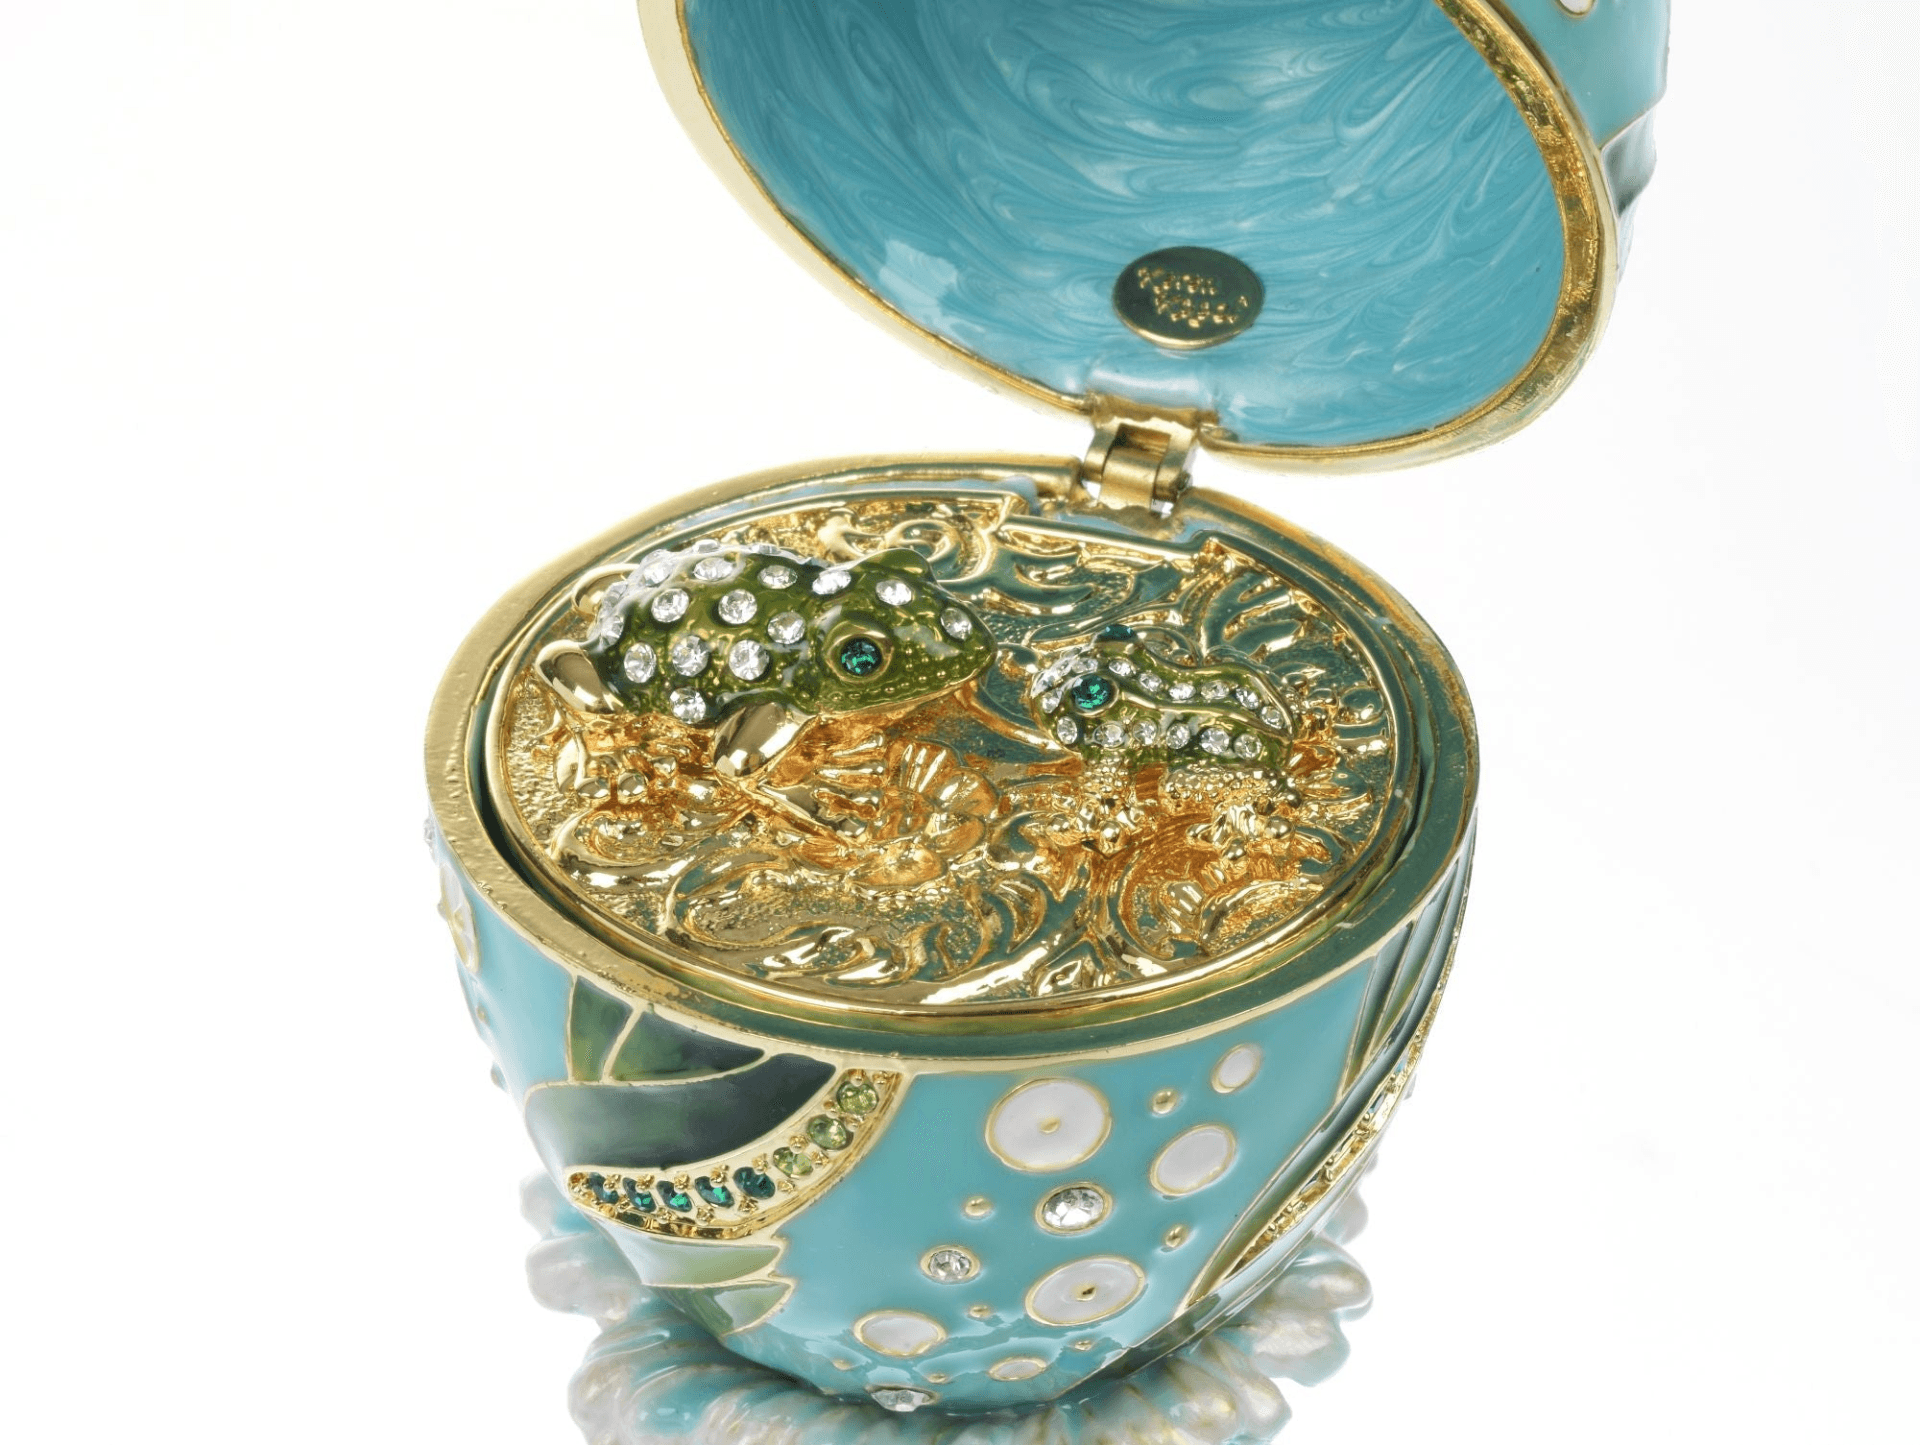 Turquoise Faberge Egg with 2 Frogs Surprise Inside  